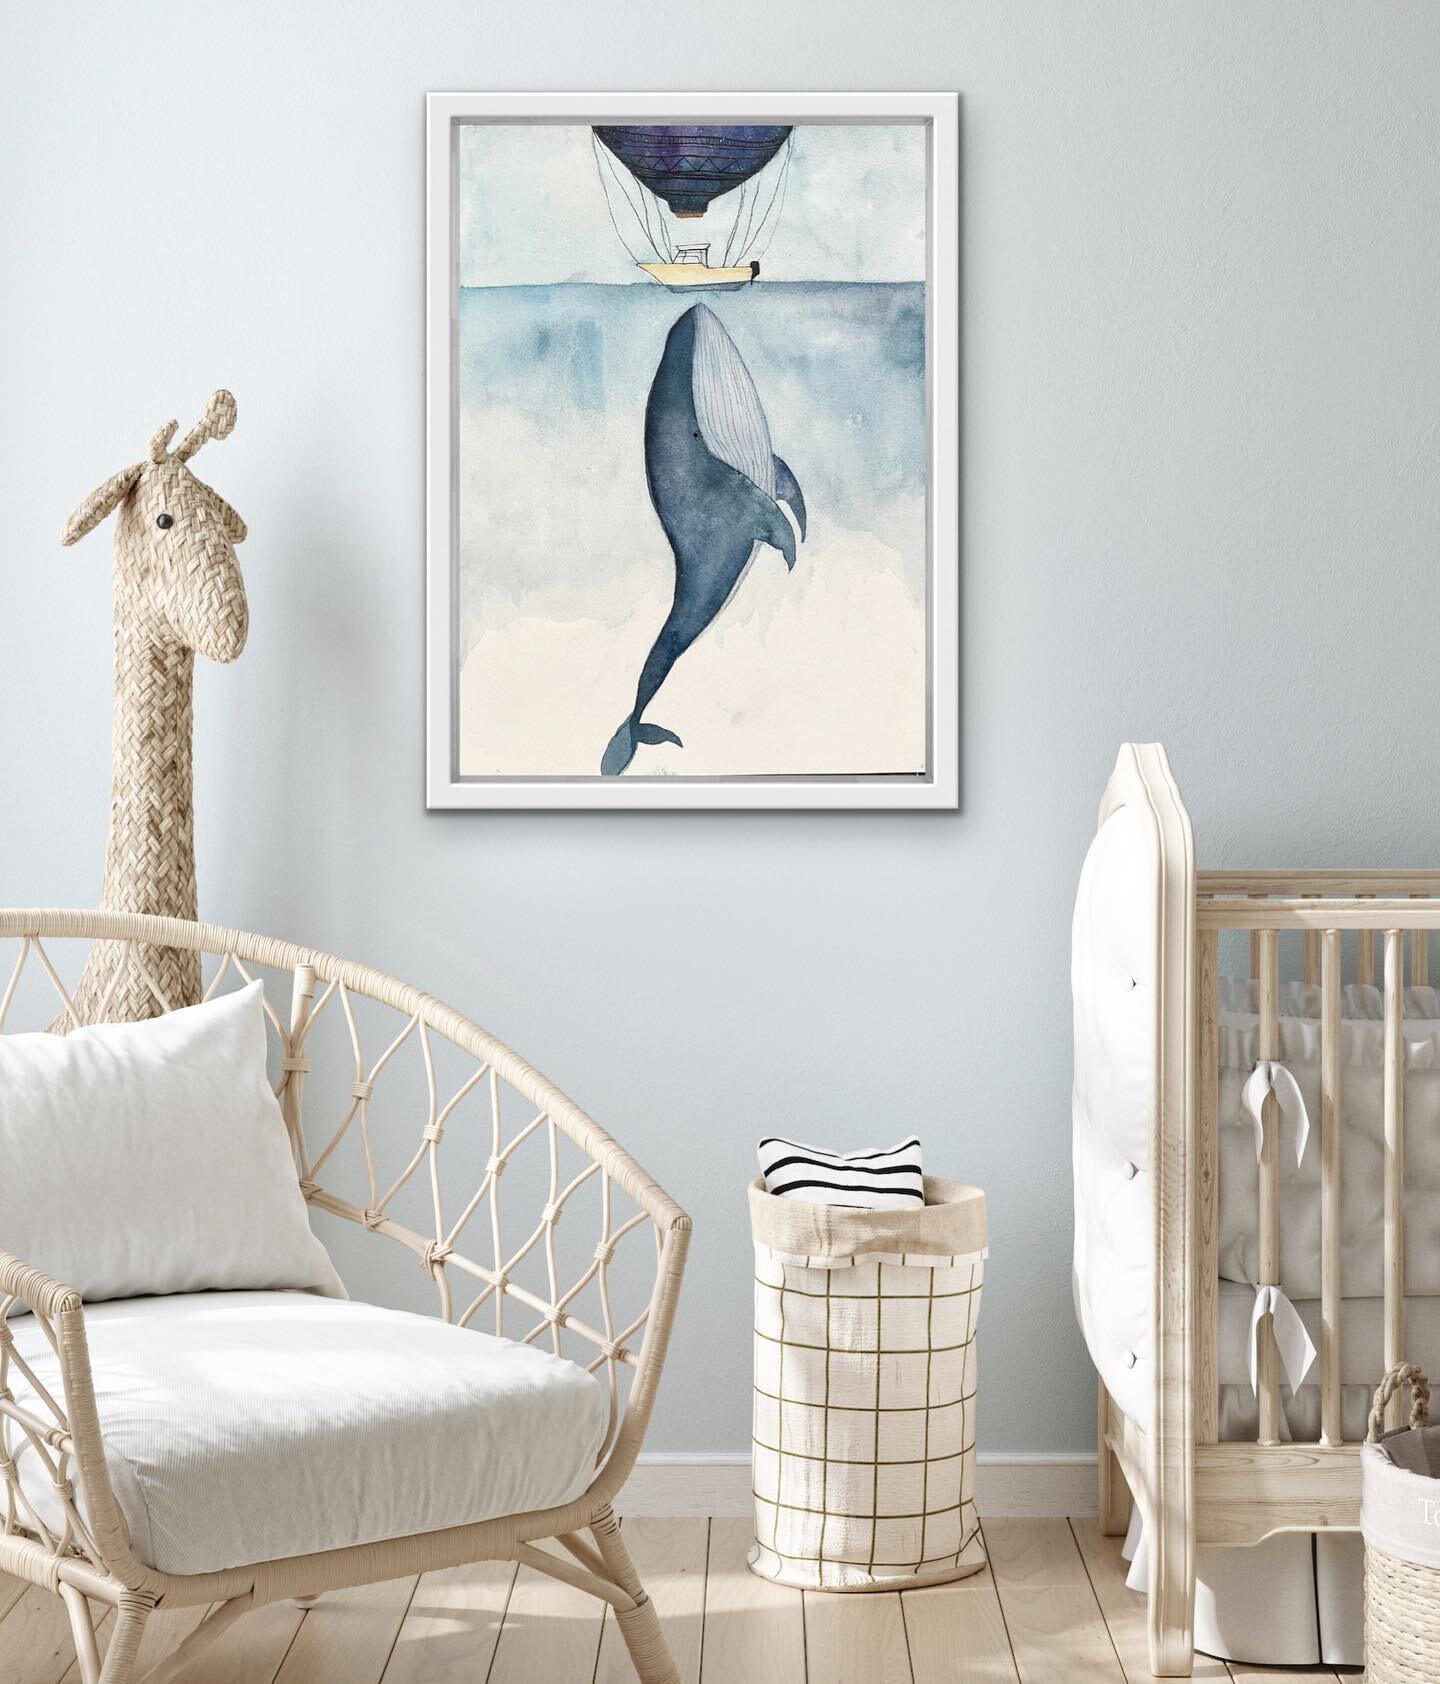 Here&rsquo;s my latest whale painting 🐋✨🐳

I could really use some name ideas for this one ✨🙏✨

Comment below some name inspo! 😊

#watercolor #paint #nurseryart #interiordesign #nurserydesign #watercolor #watercolorartist #watercolorprints #babyr